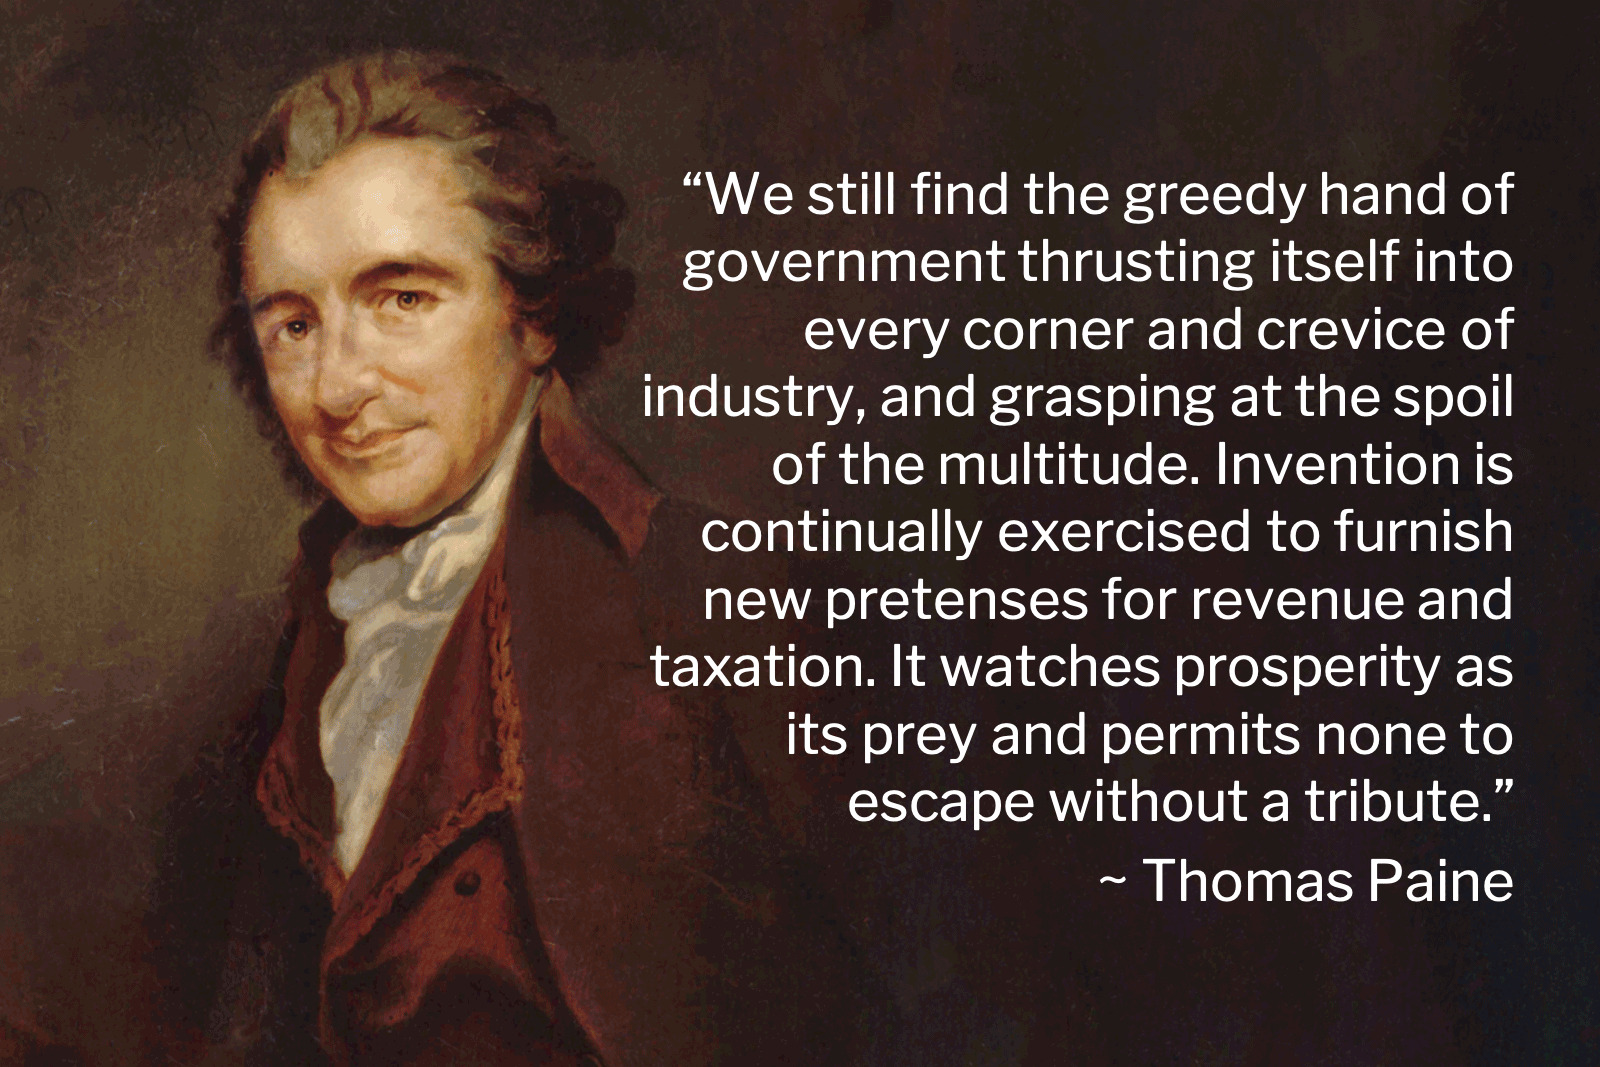 Portrait of Thomas Paine with his quote: We still find the greedy hand of government thrusting itself into every corner and crevice of industry and grasping at the spoil of the multitude. Invention is continually exercised to furnish new pretenses for revenue and taxation. It watches prosperity as its prey and permits none to escape without a tribute.